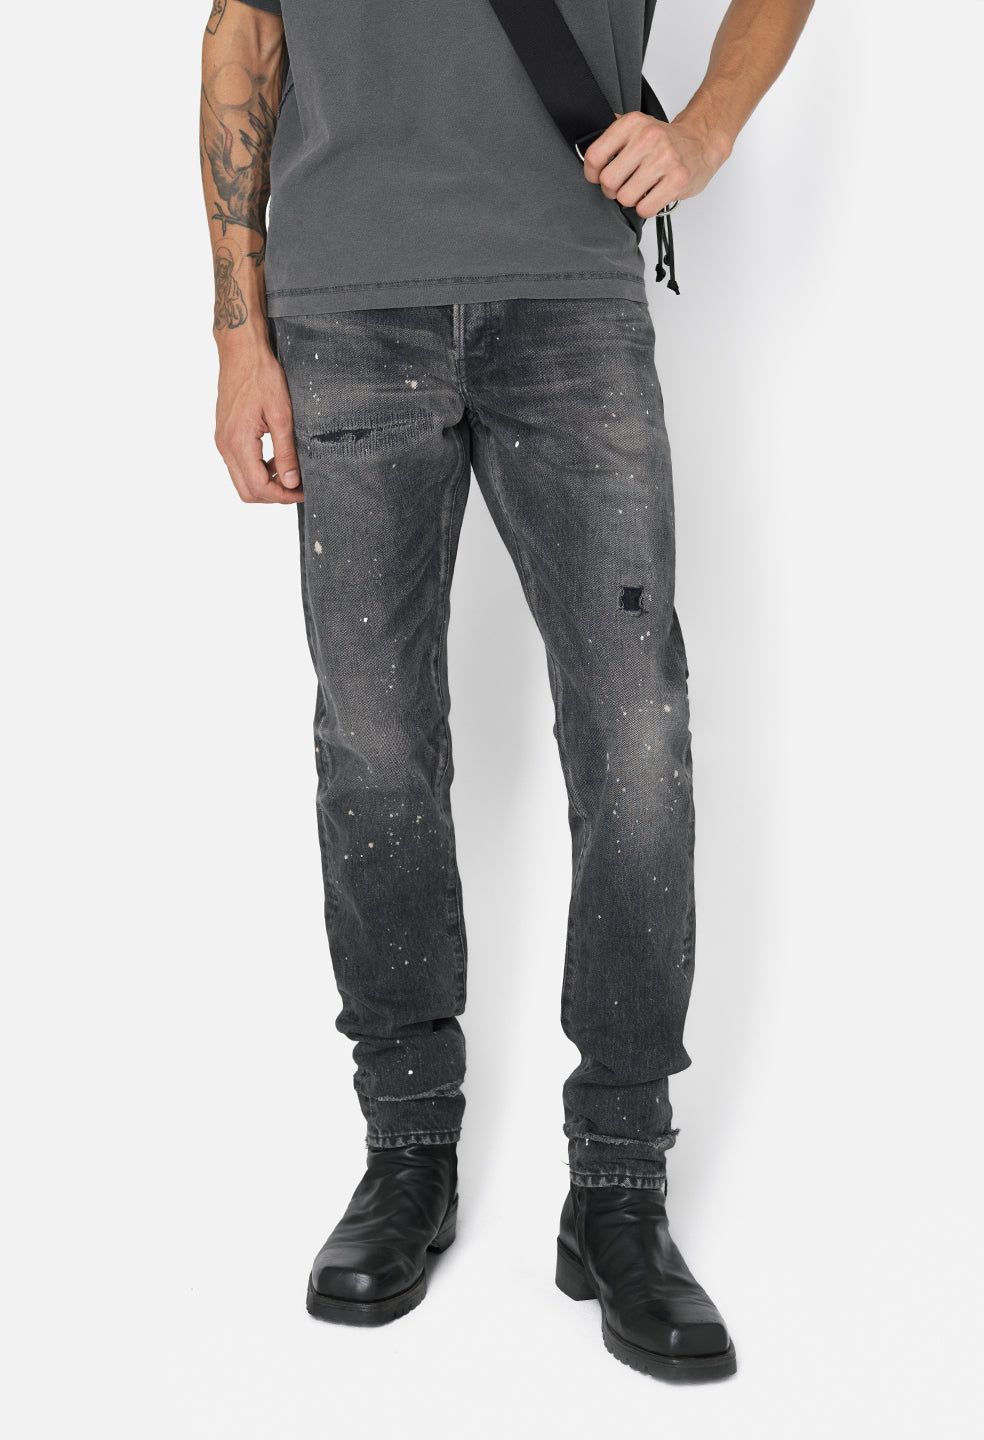 Guess Jeans FW23 Collection